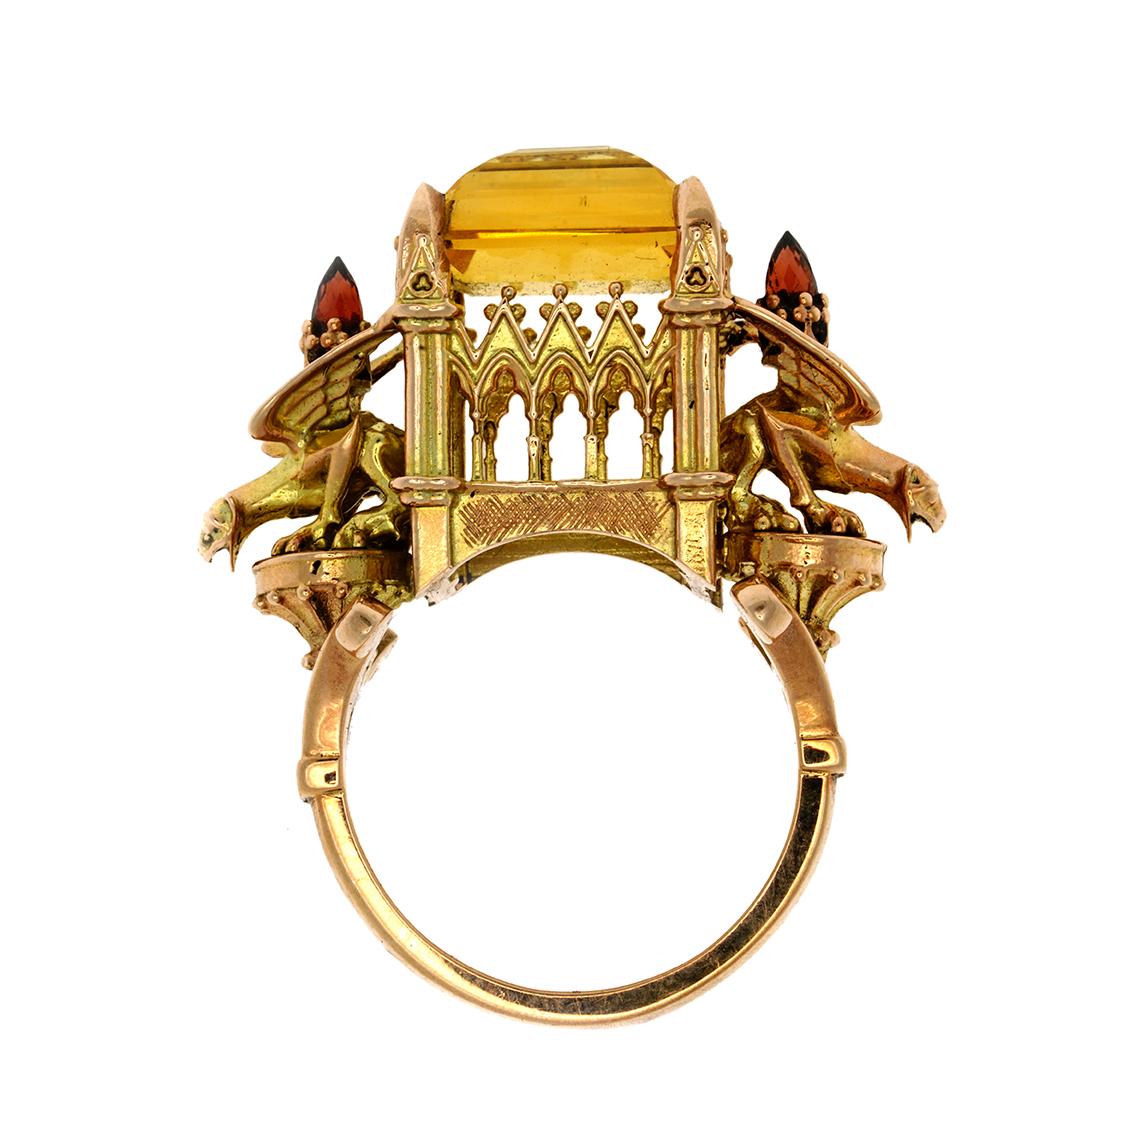 Baroque William Llewellyn Griffiths 9 Karat Gold Citrine Euphoric Triumph Cathedral Ring